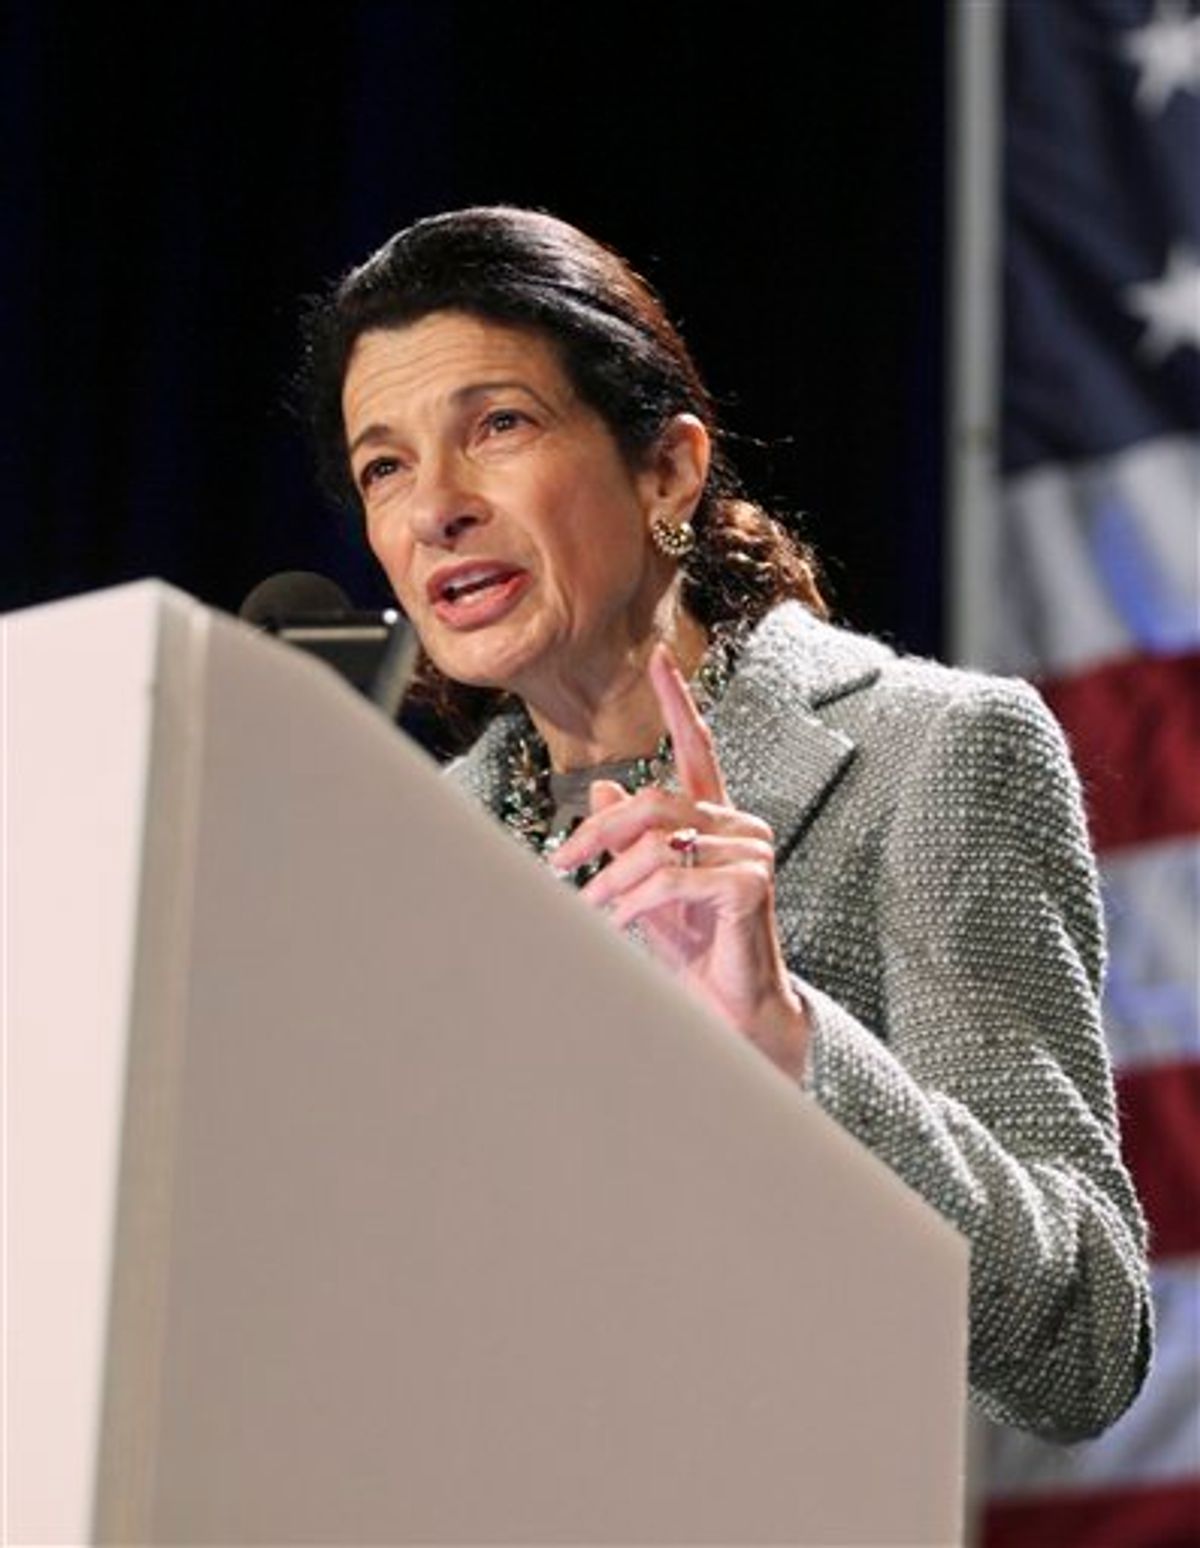 FILE- In this May 7, 2010 file photo, Sen. Olympia Snowe, R-Maine, speaks in Portland, Maine.  The government is expected to announce this week that more than 58 million Social Security recipients will go through another year without an increase in their monthly benefits. Snowe was the only Republican to support a second Social Security bonus payment, like the one-time $250 in 2009, when it became clear that seniors wouldn't get an increase in monthly benefit payments in 2010; the bill died from lack of support.   (AP Photo/Joel Page, File) (AP)